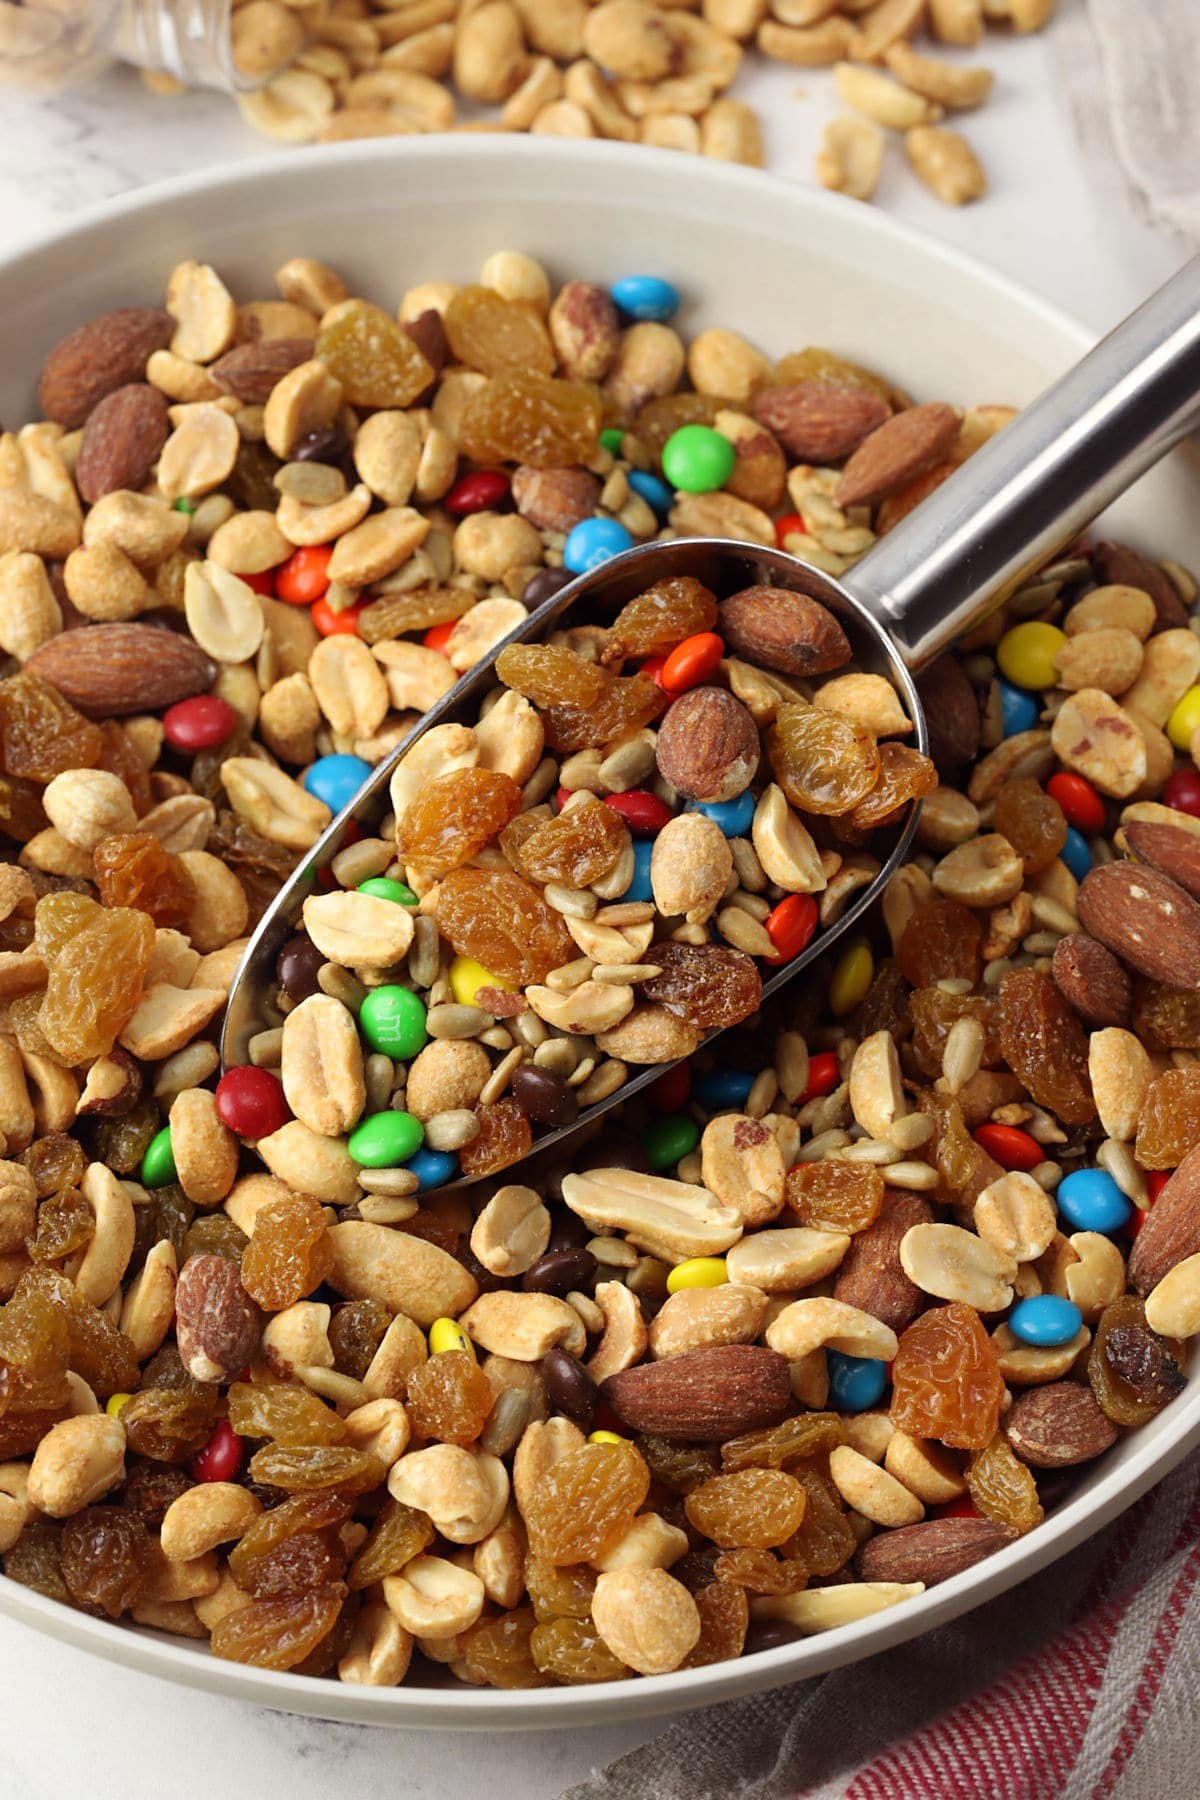 Metal scoop in a bowl of trail mix.